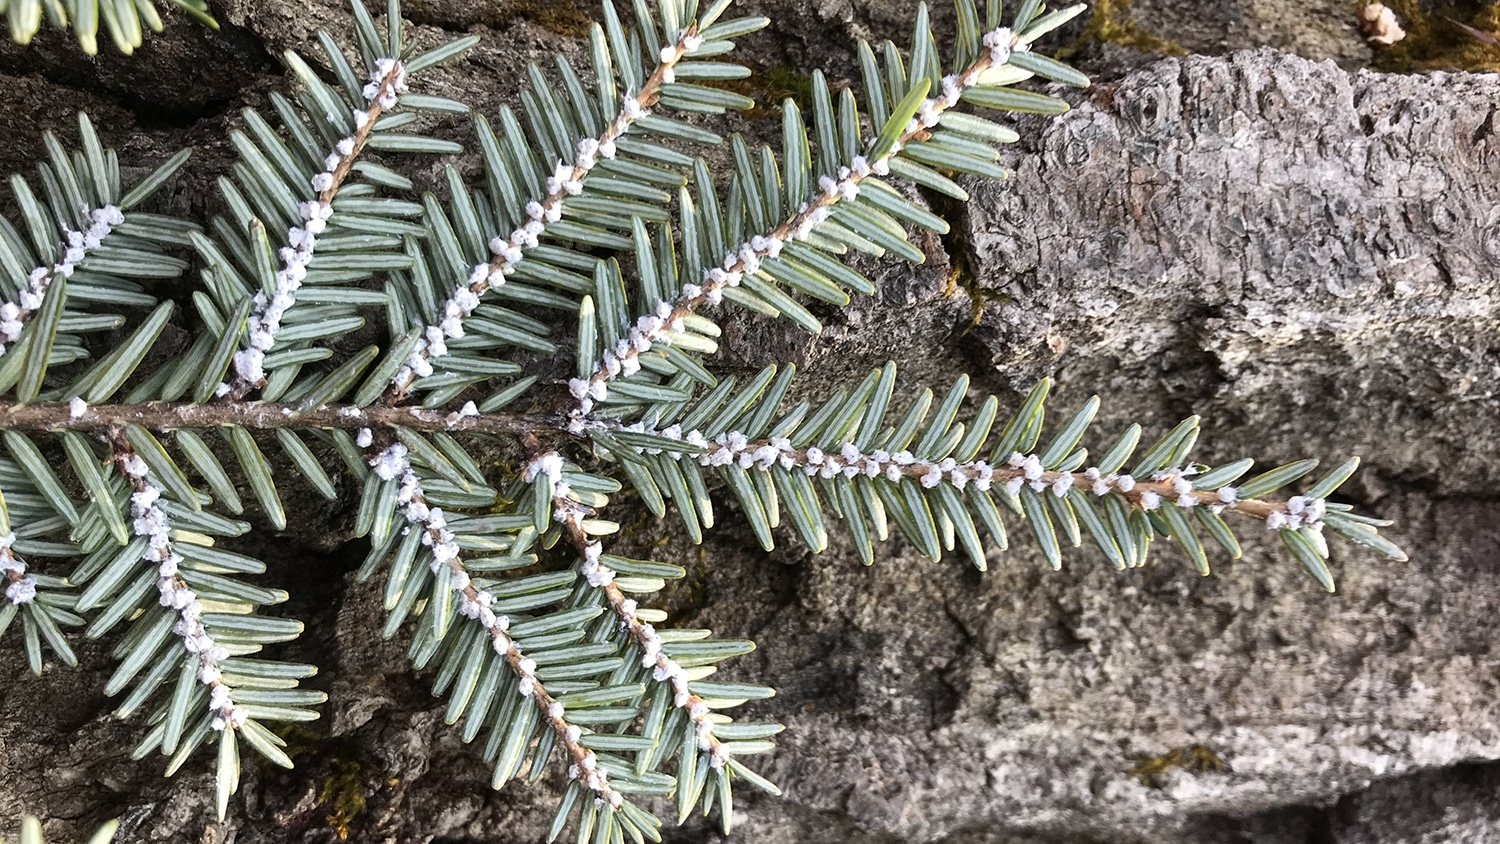 woolly adelgid - Canopy Gaps Help Eastern Hemlock Outlast Invasive Insect - College of Natural Resources News NC State University